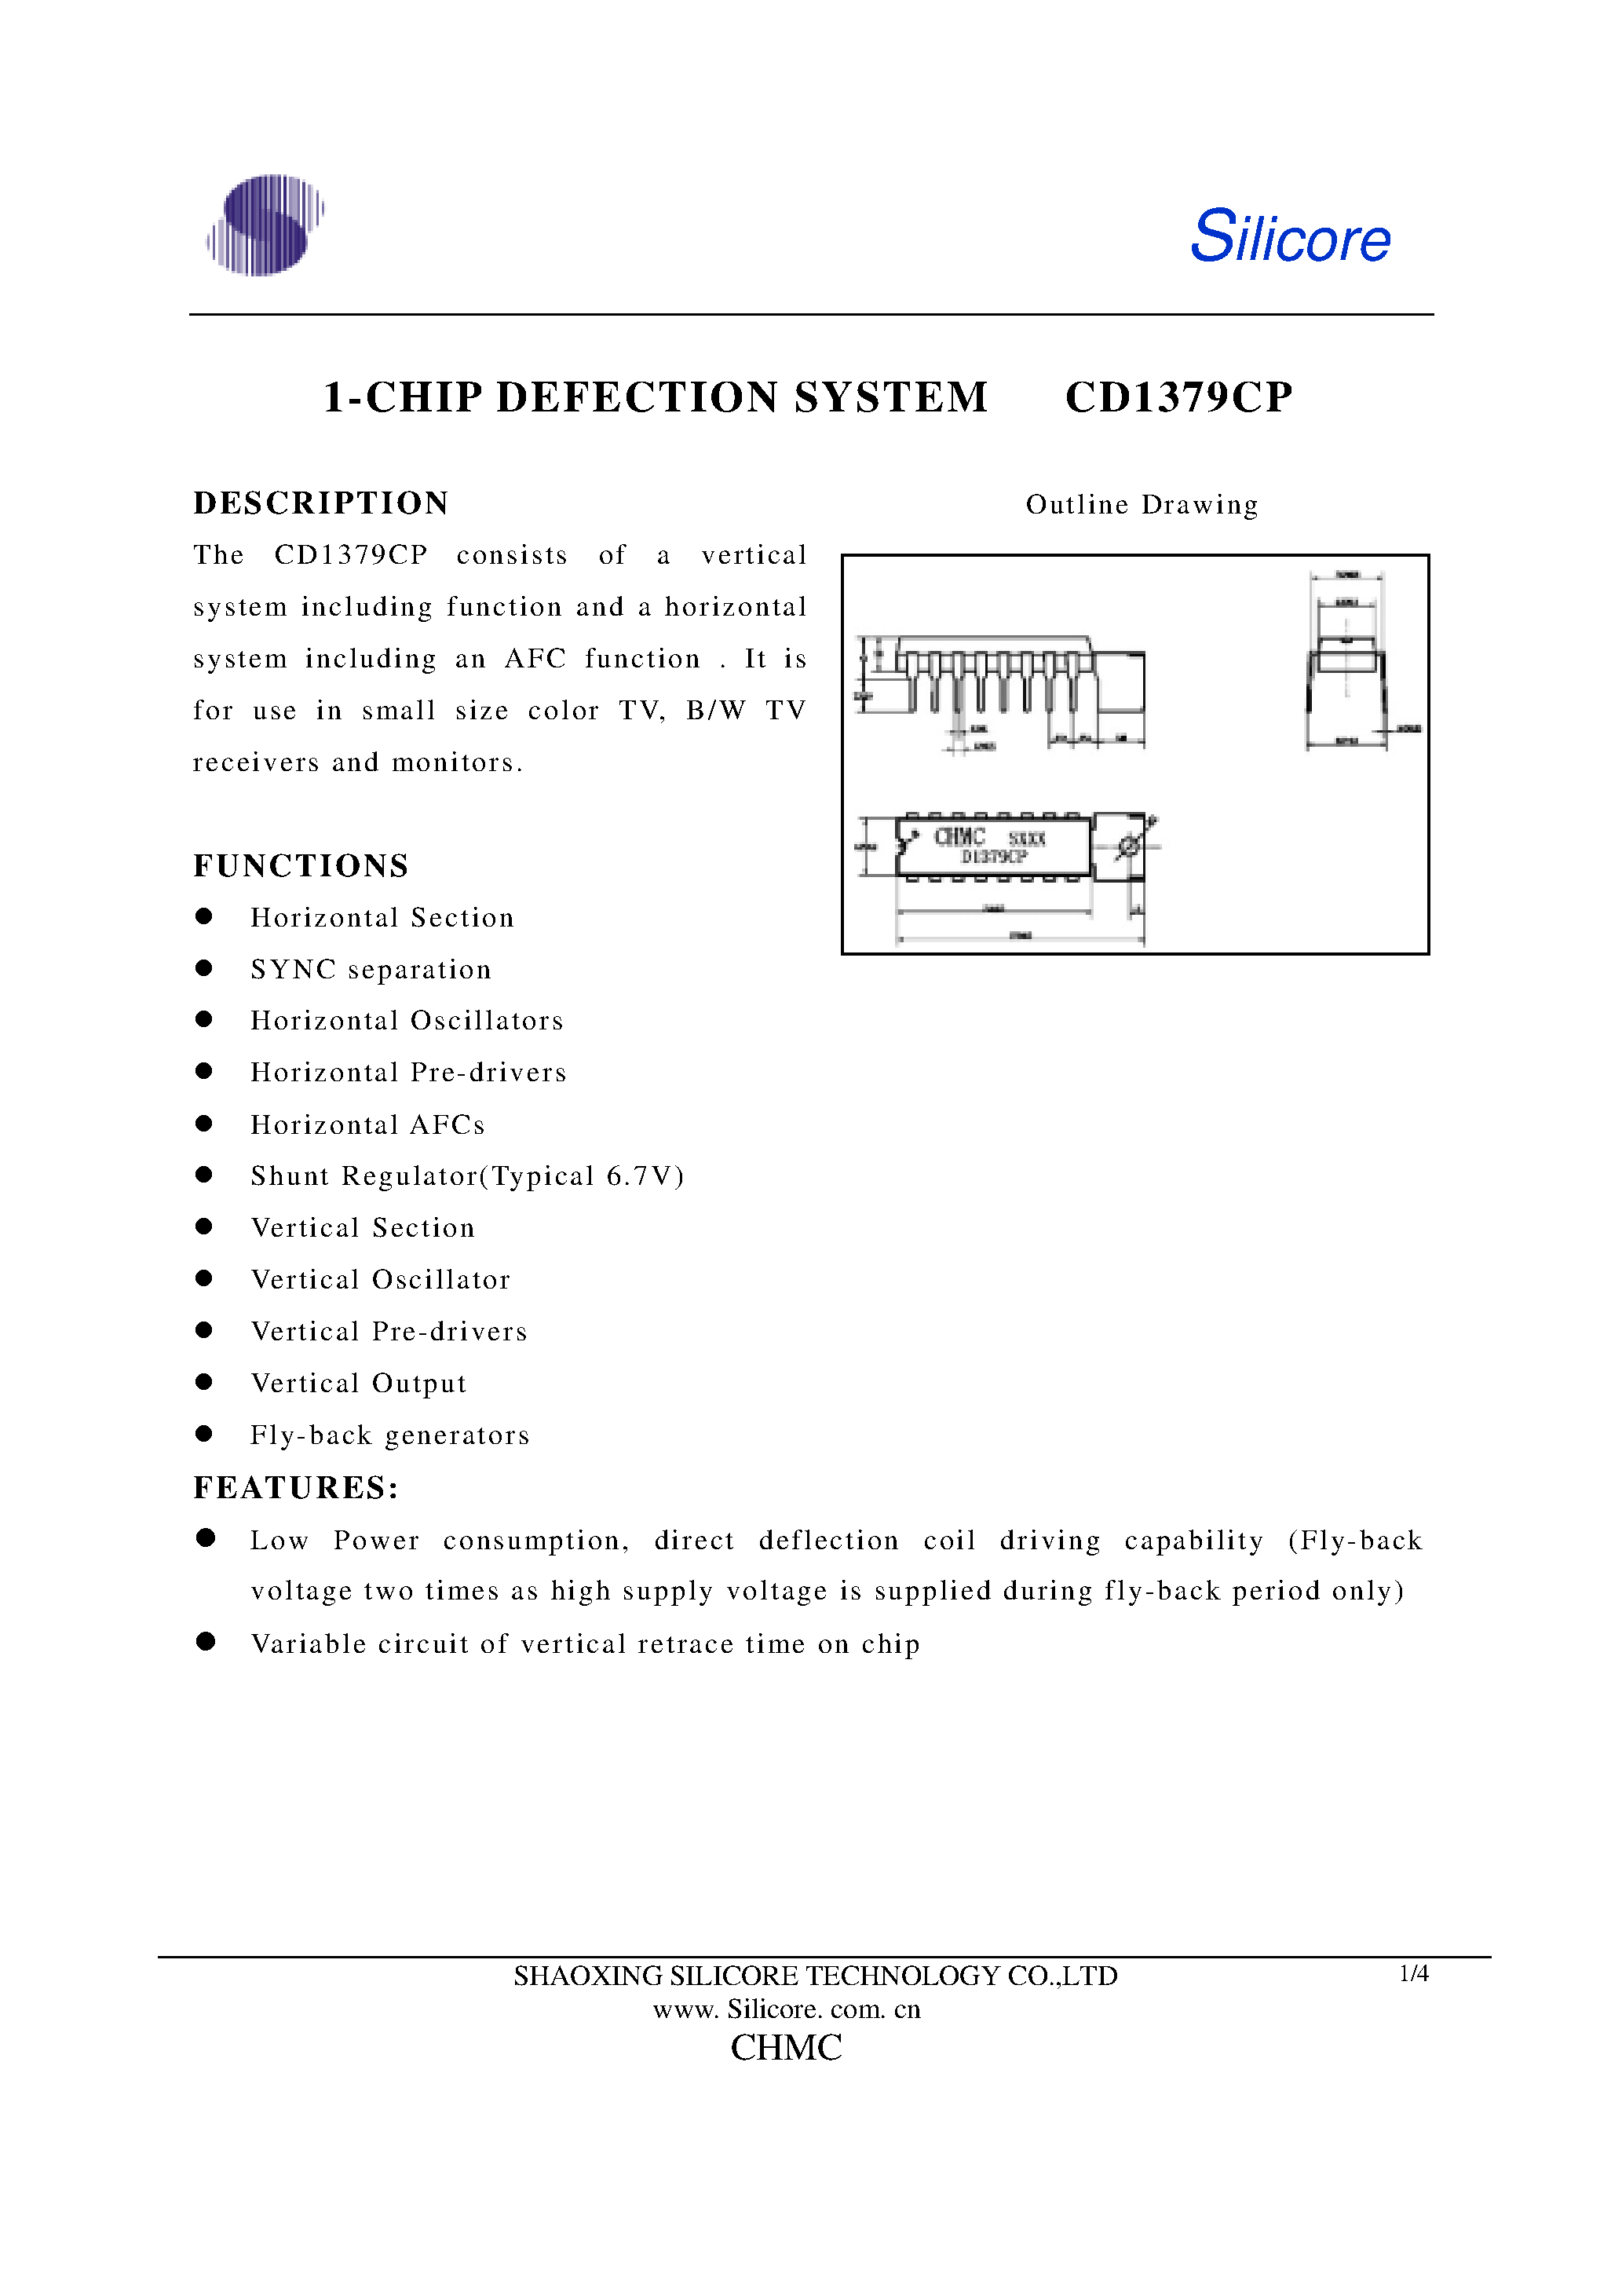 Datasheet CD1379CP - 1-Chip Defection System page 1